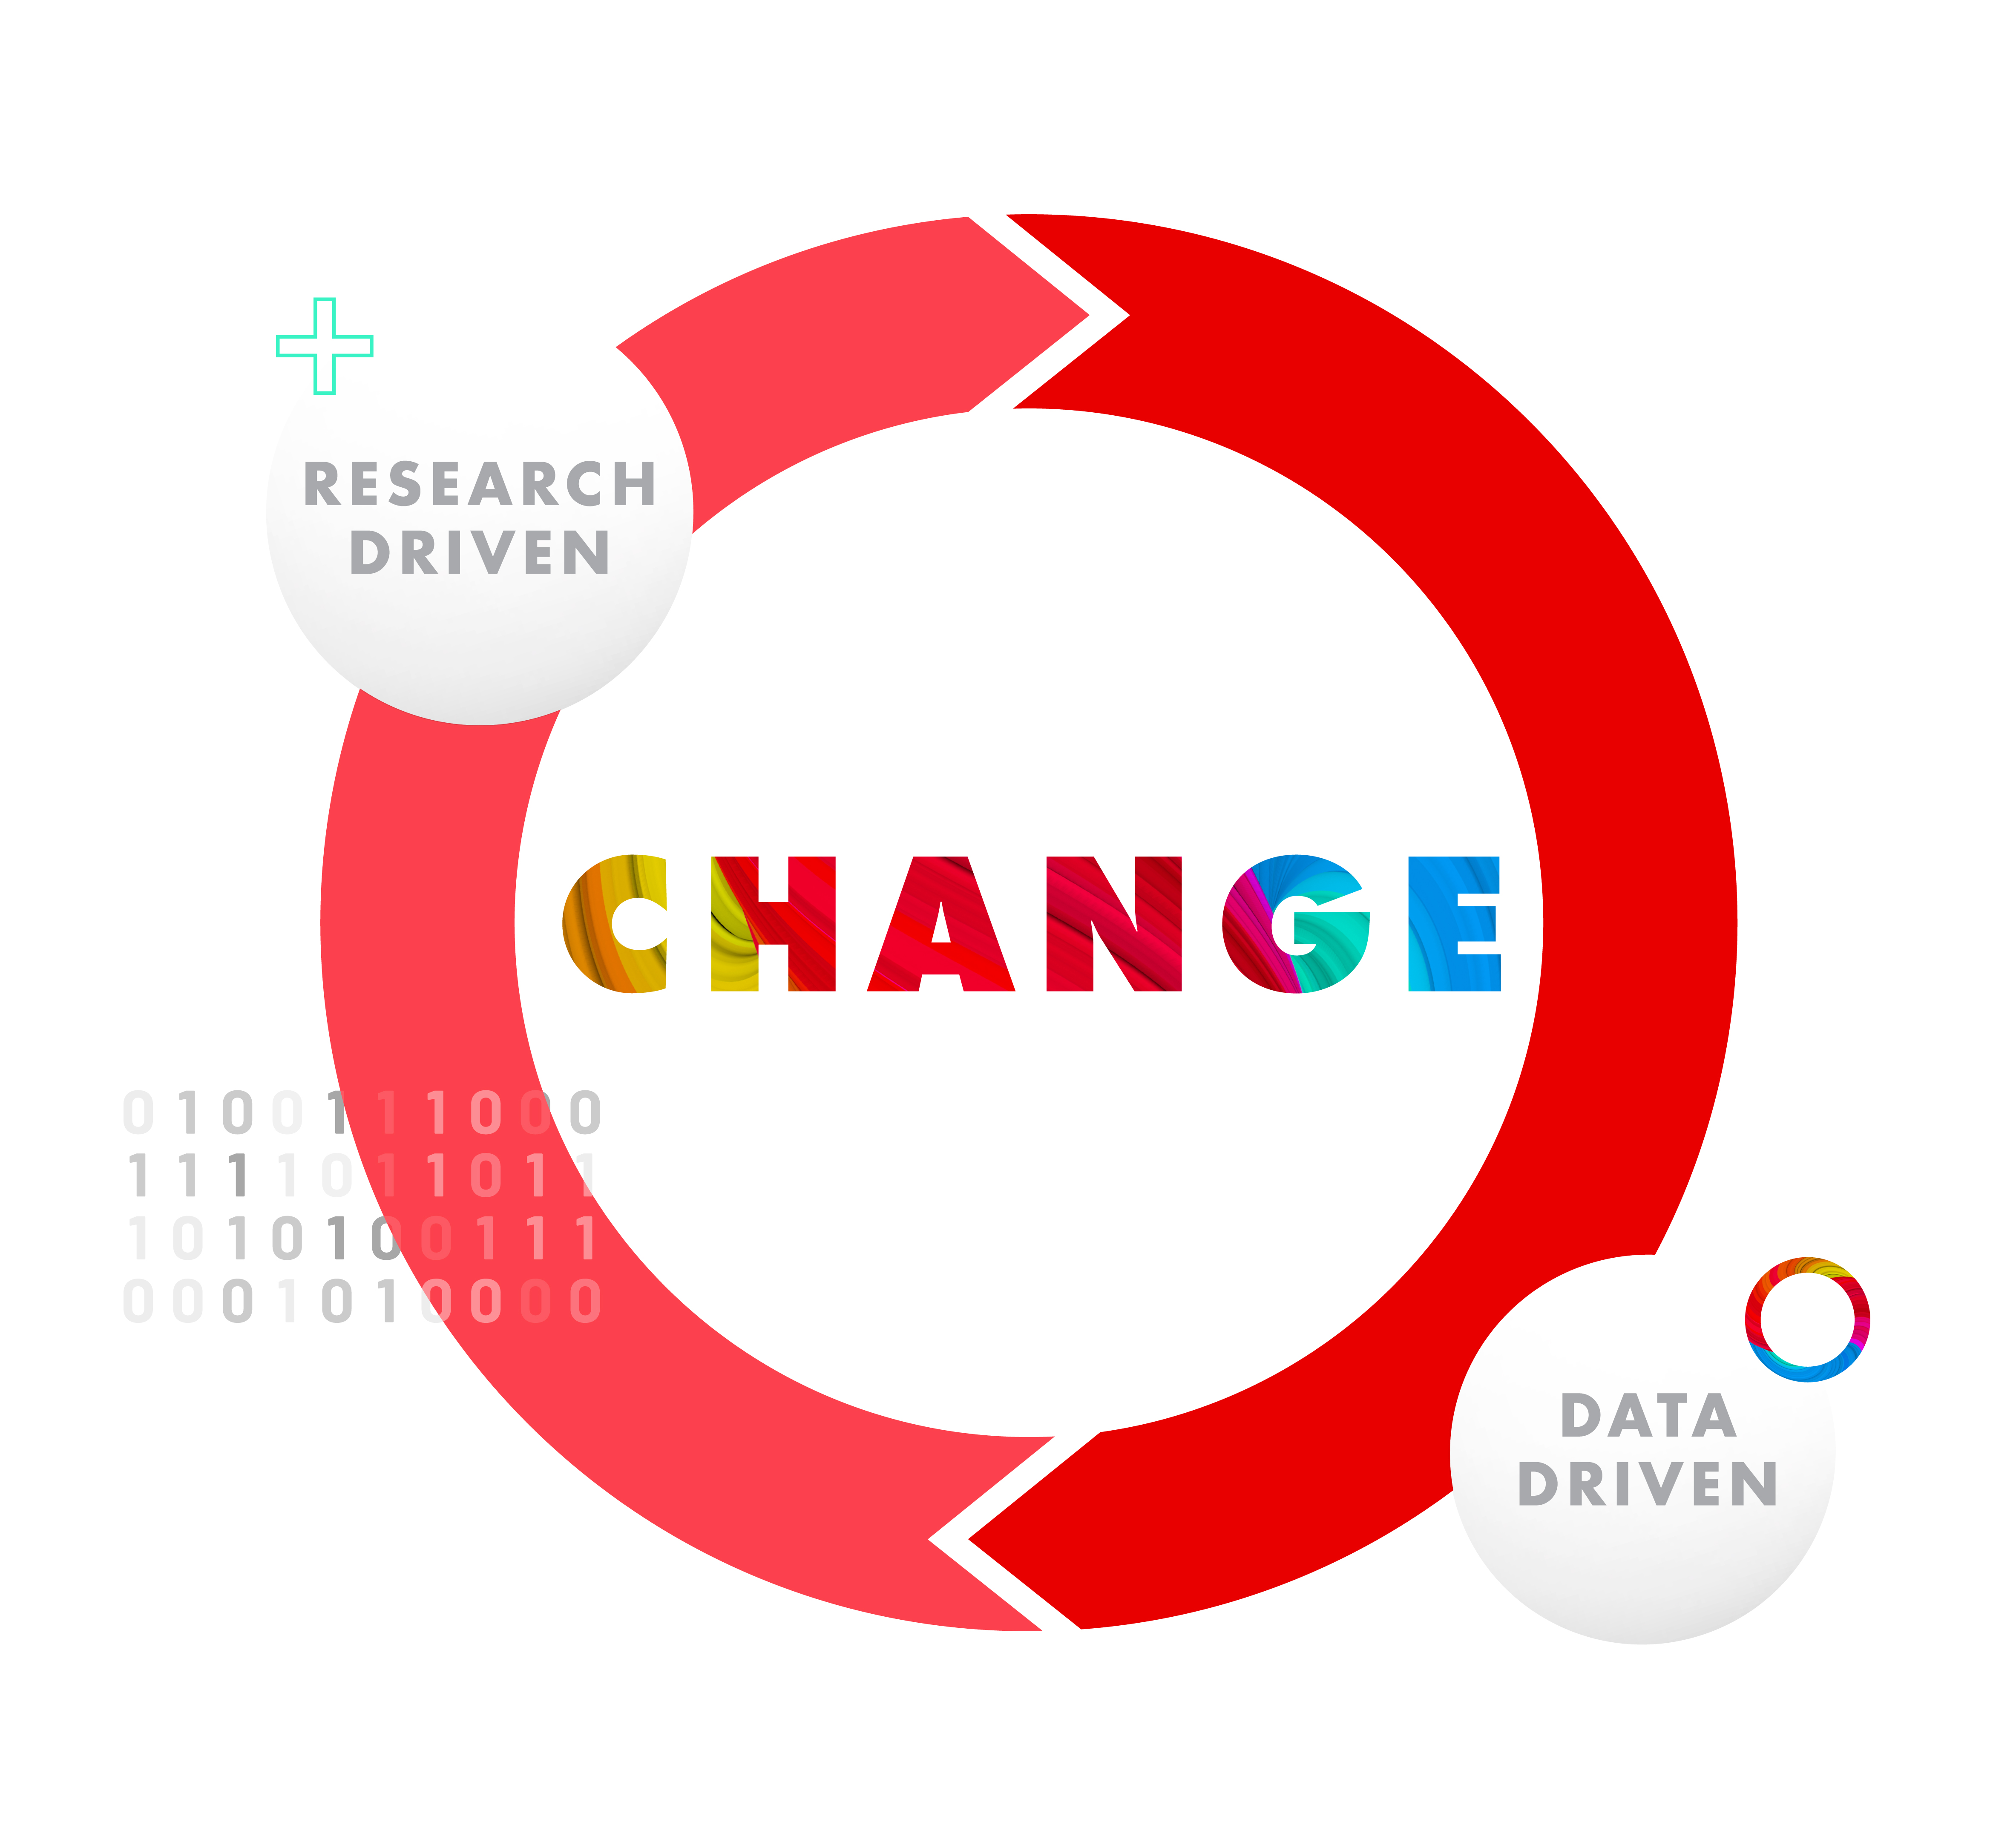 Demonstrates organizational change being driven by research and data